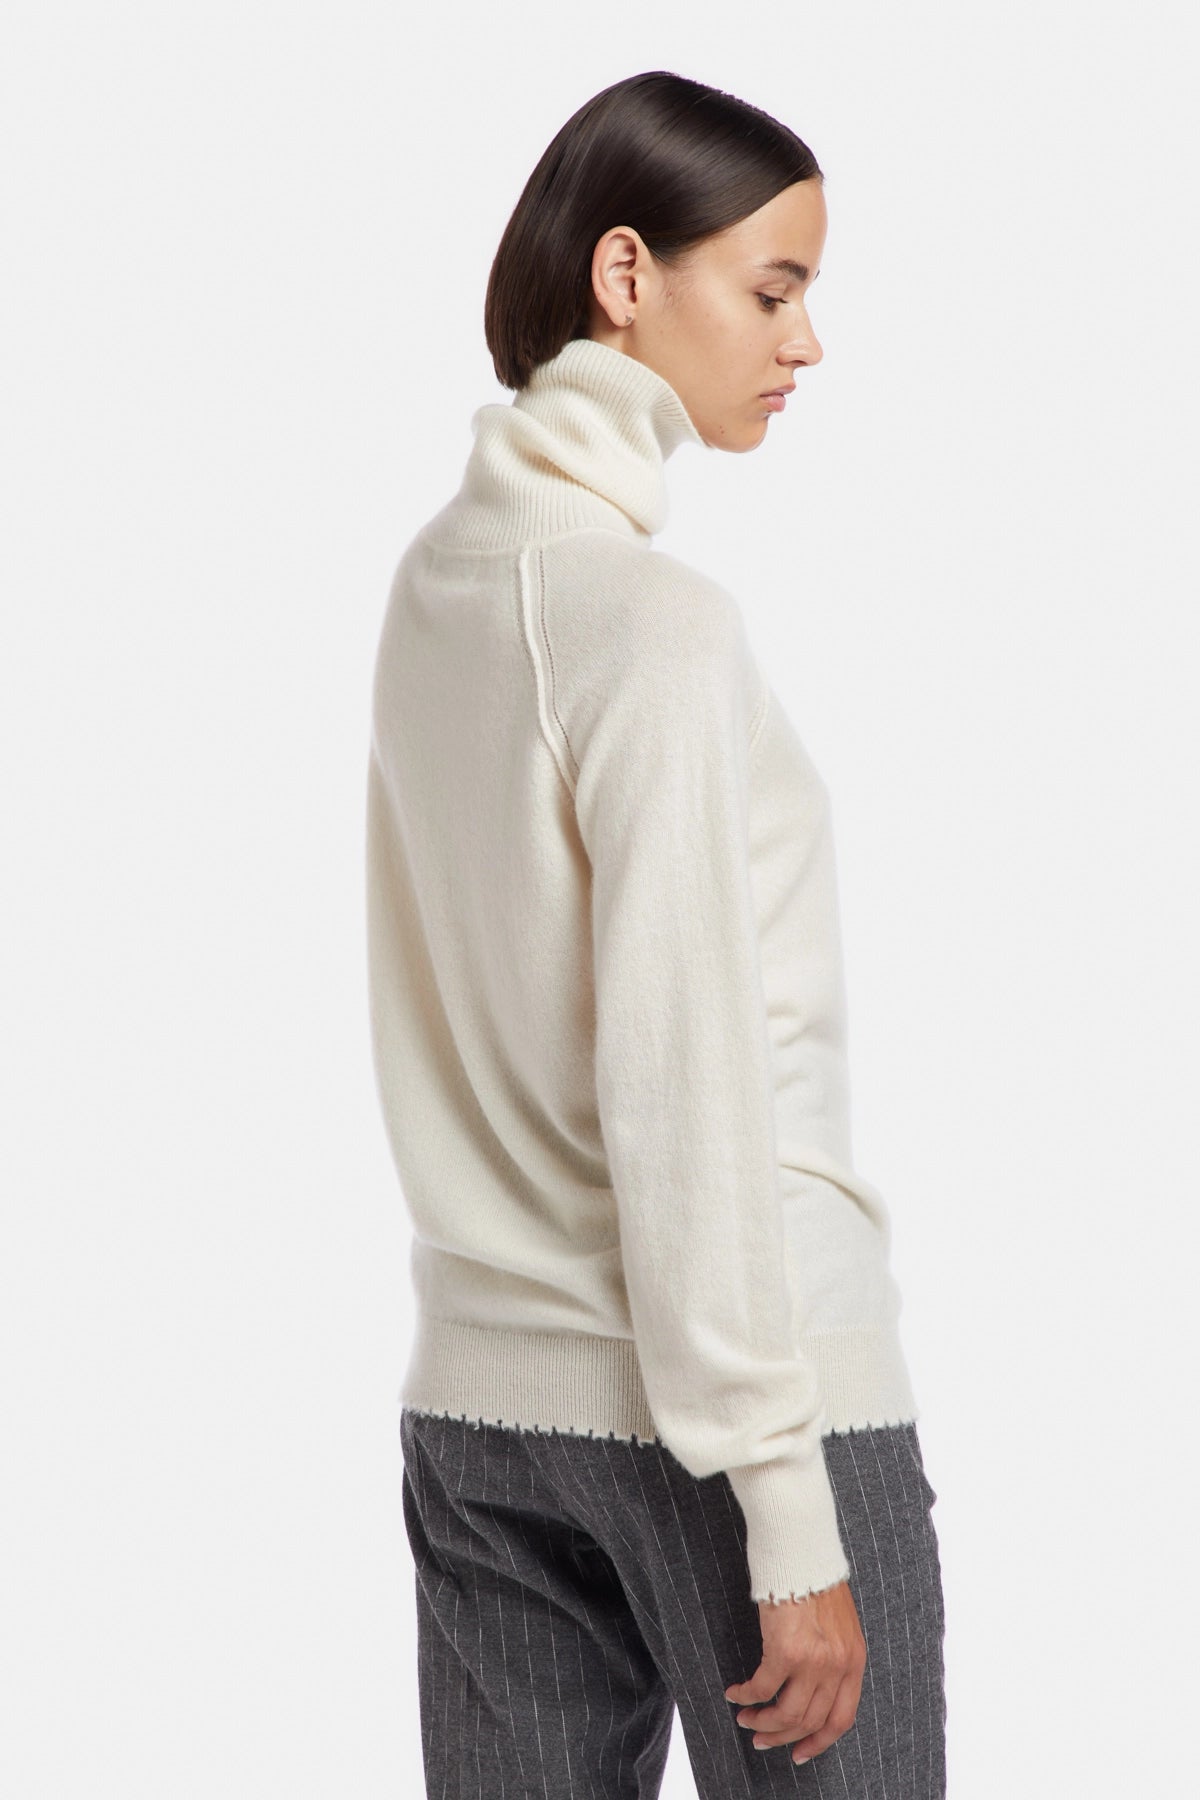 High neck sweater with tears at the bottom and cuffs